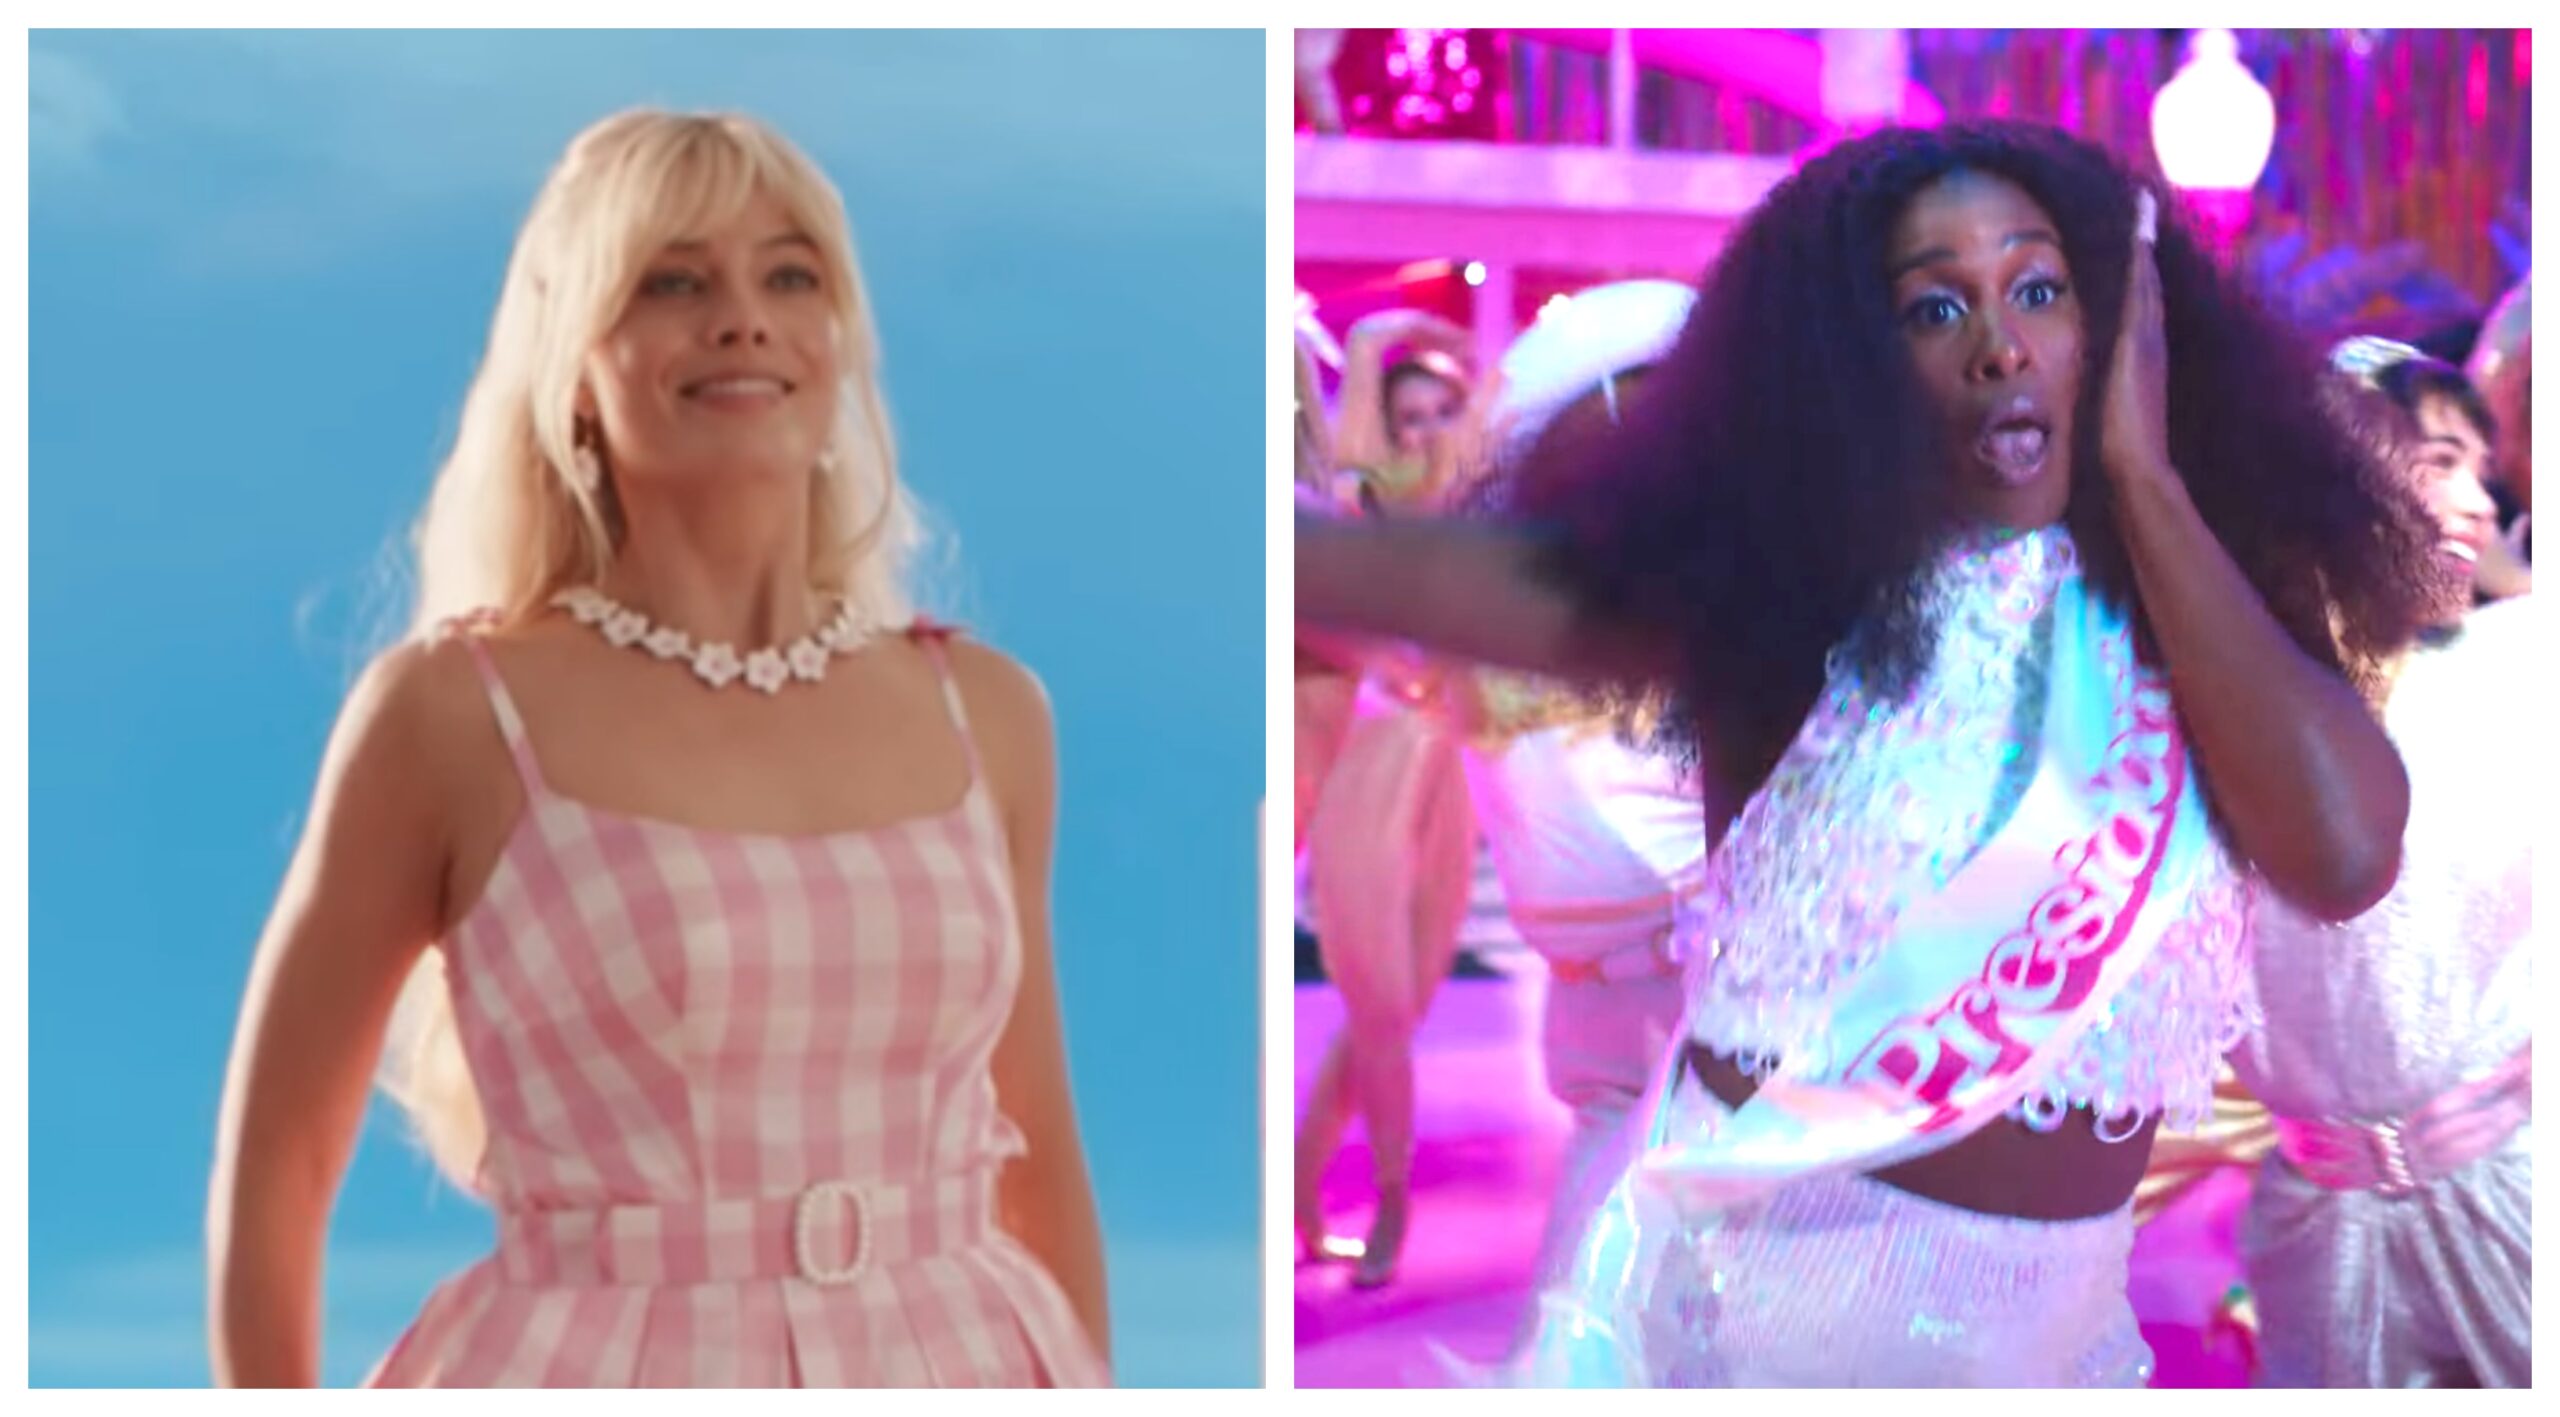 2023 Year in Review: ‘Barbie’ Broke Records And Became One of the Biggest Movies of the Year